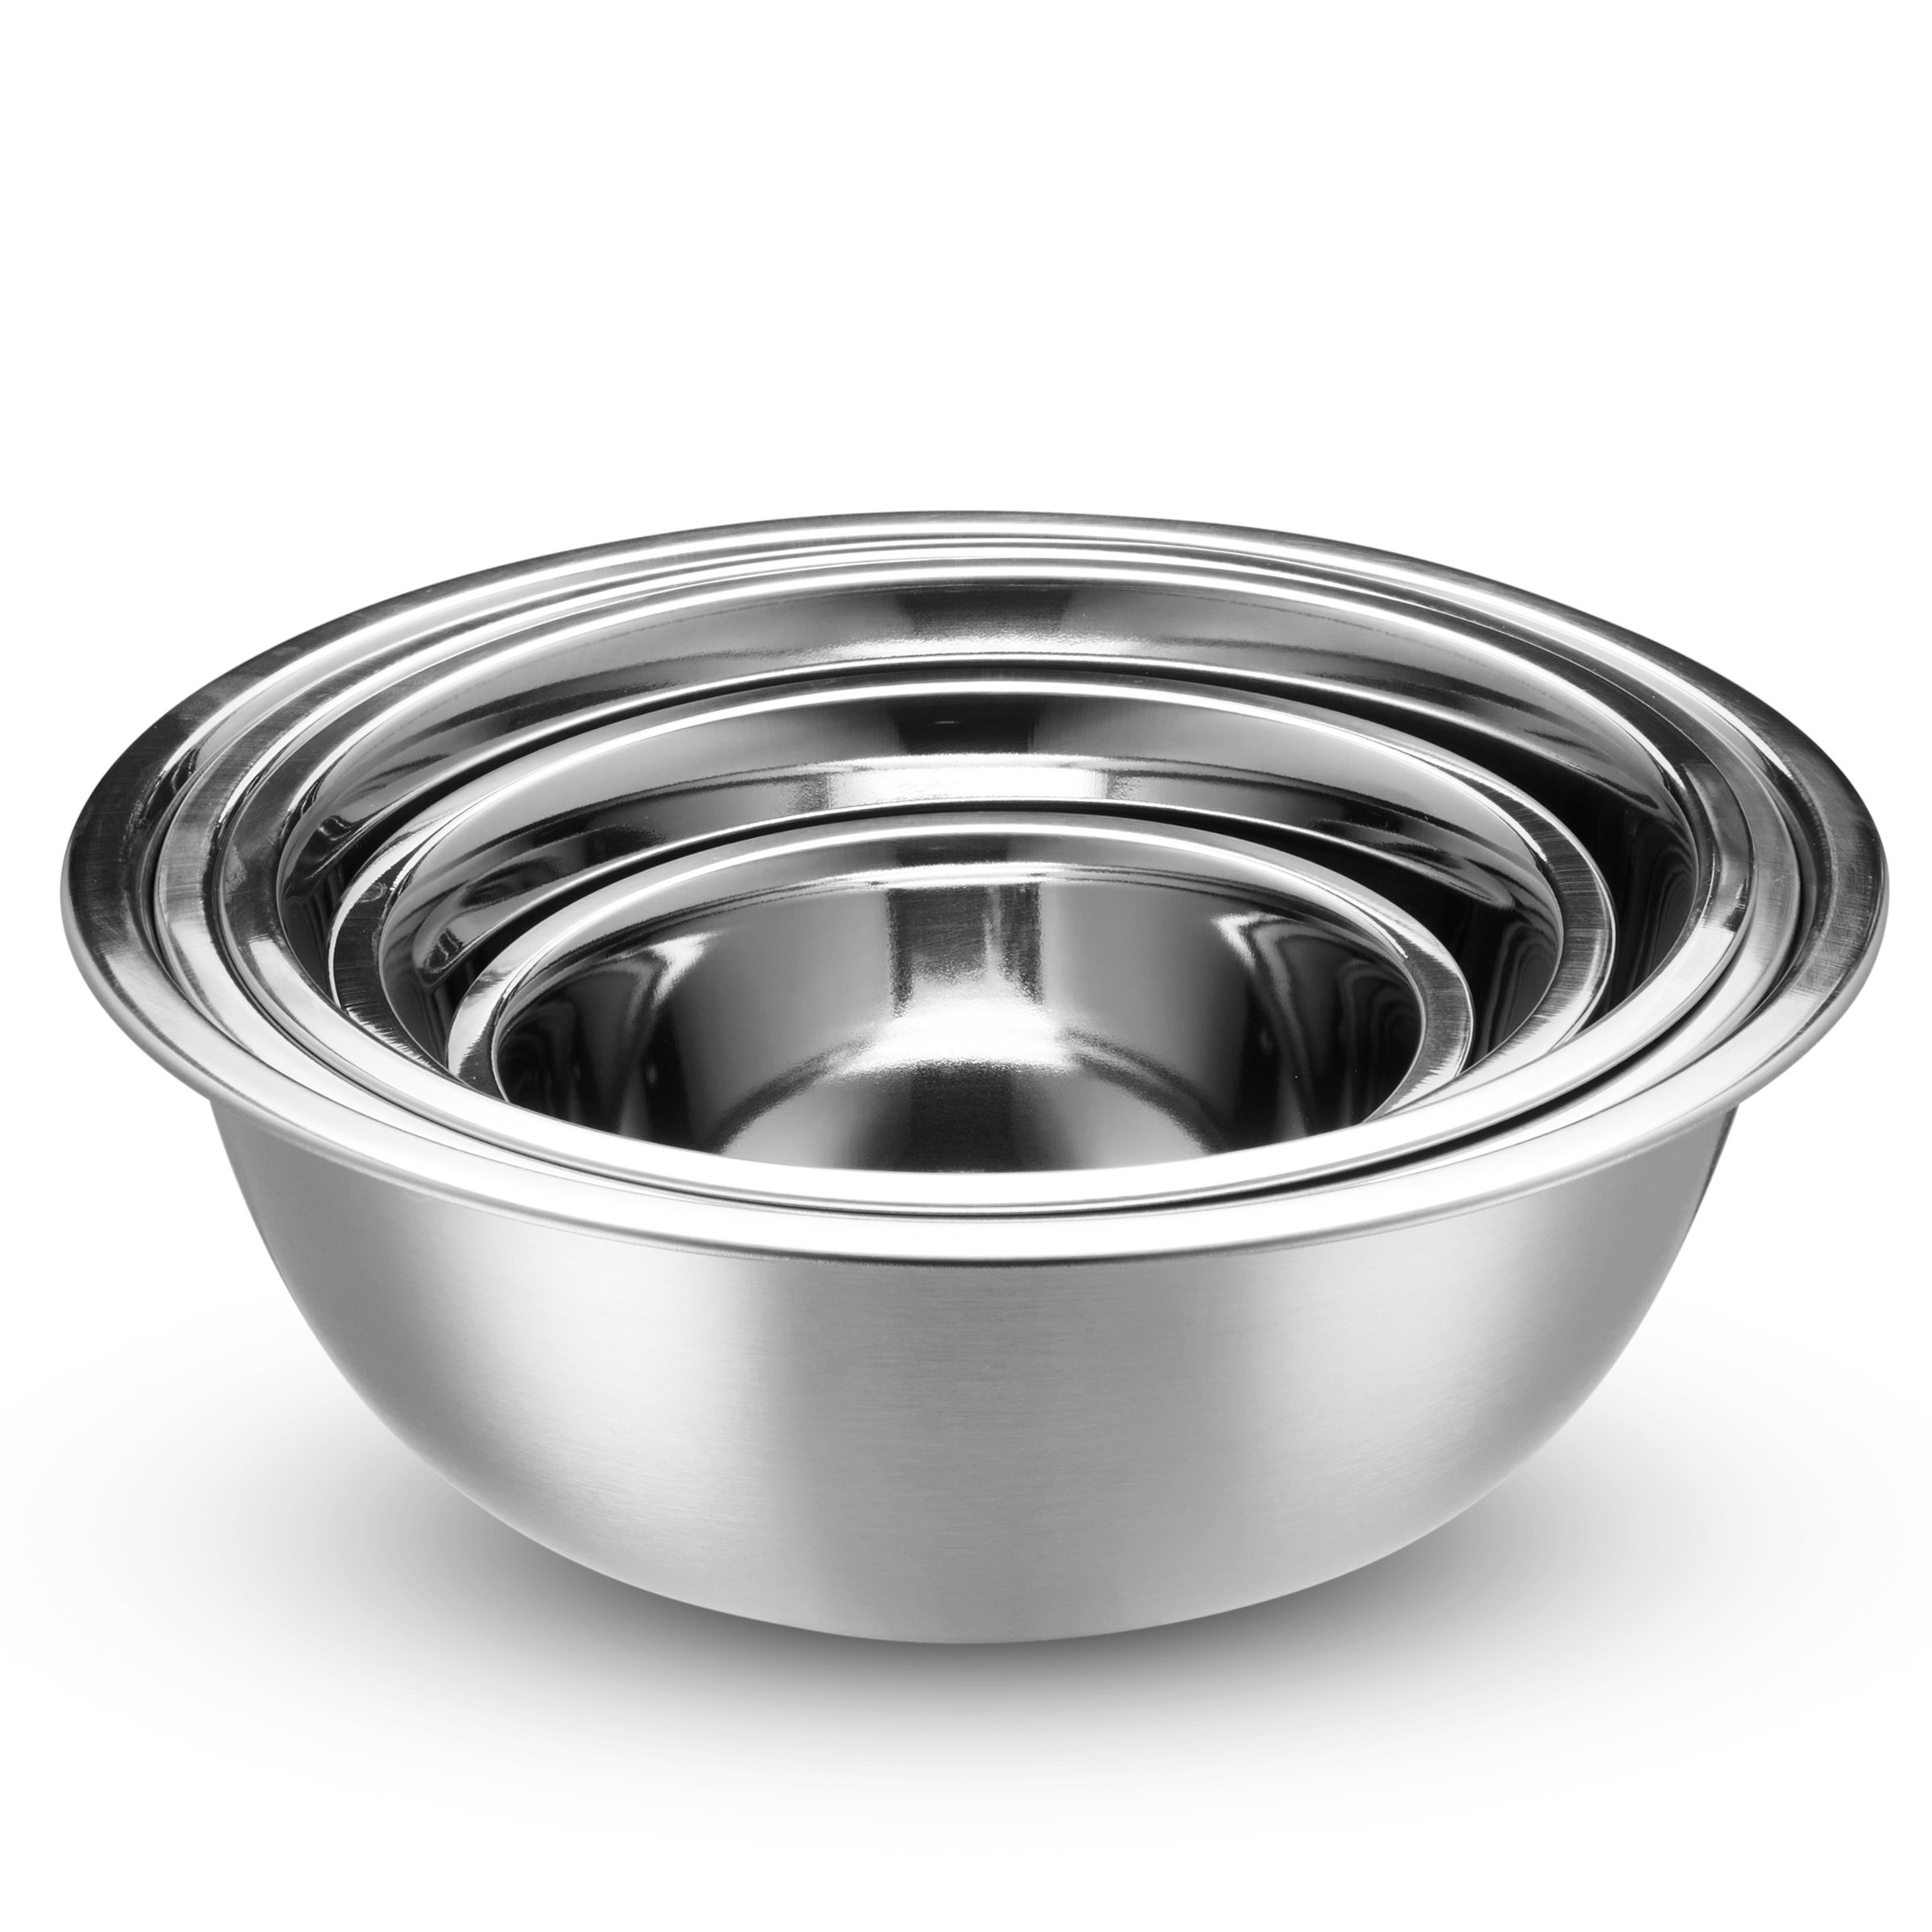 WHYSKO Stainless Steel Mixing Bowls With Lids Set, 5 Sizes Nesting